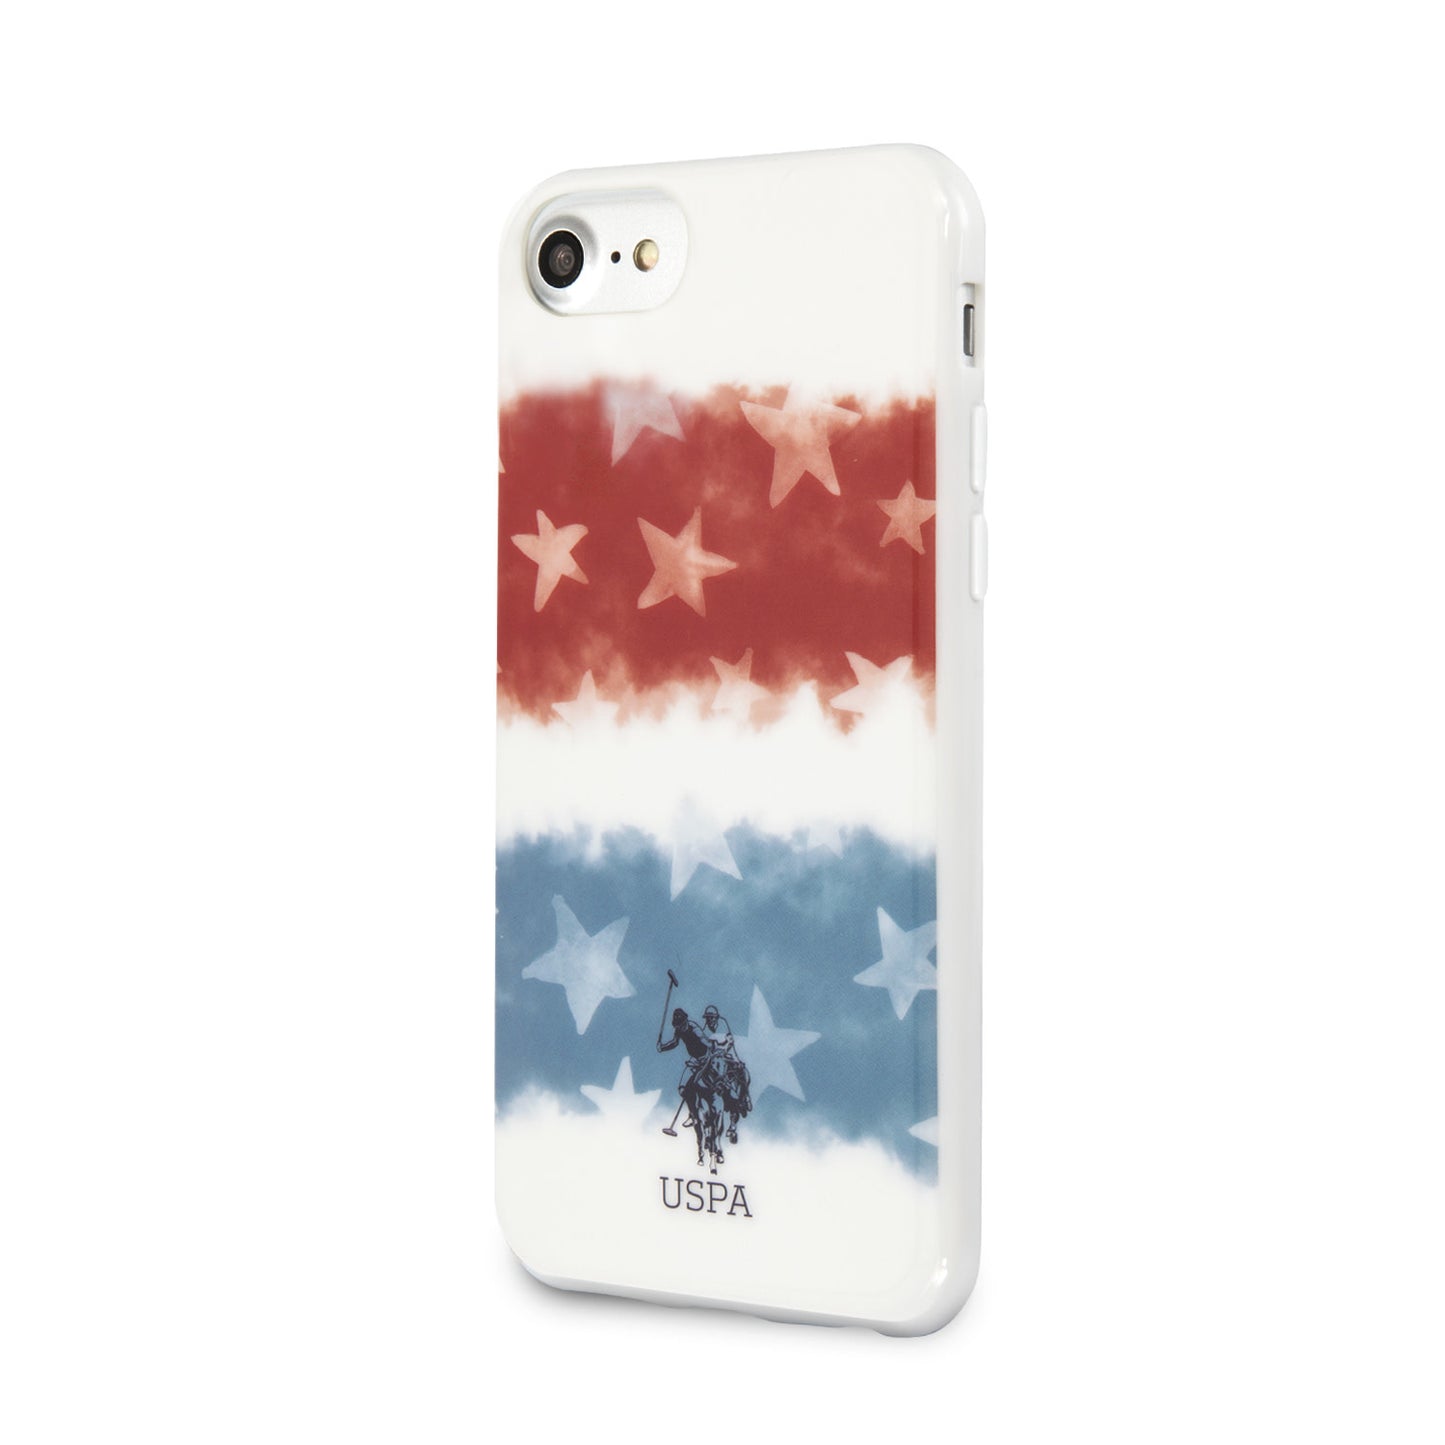 US POLO Backcover voor de iPhone SE (2022/2020) iPhone 8/ iPhone 7 - Wit